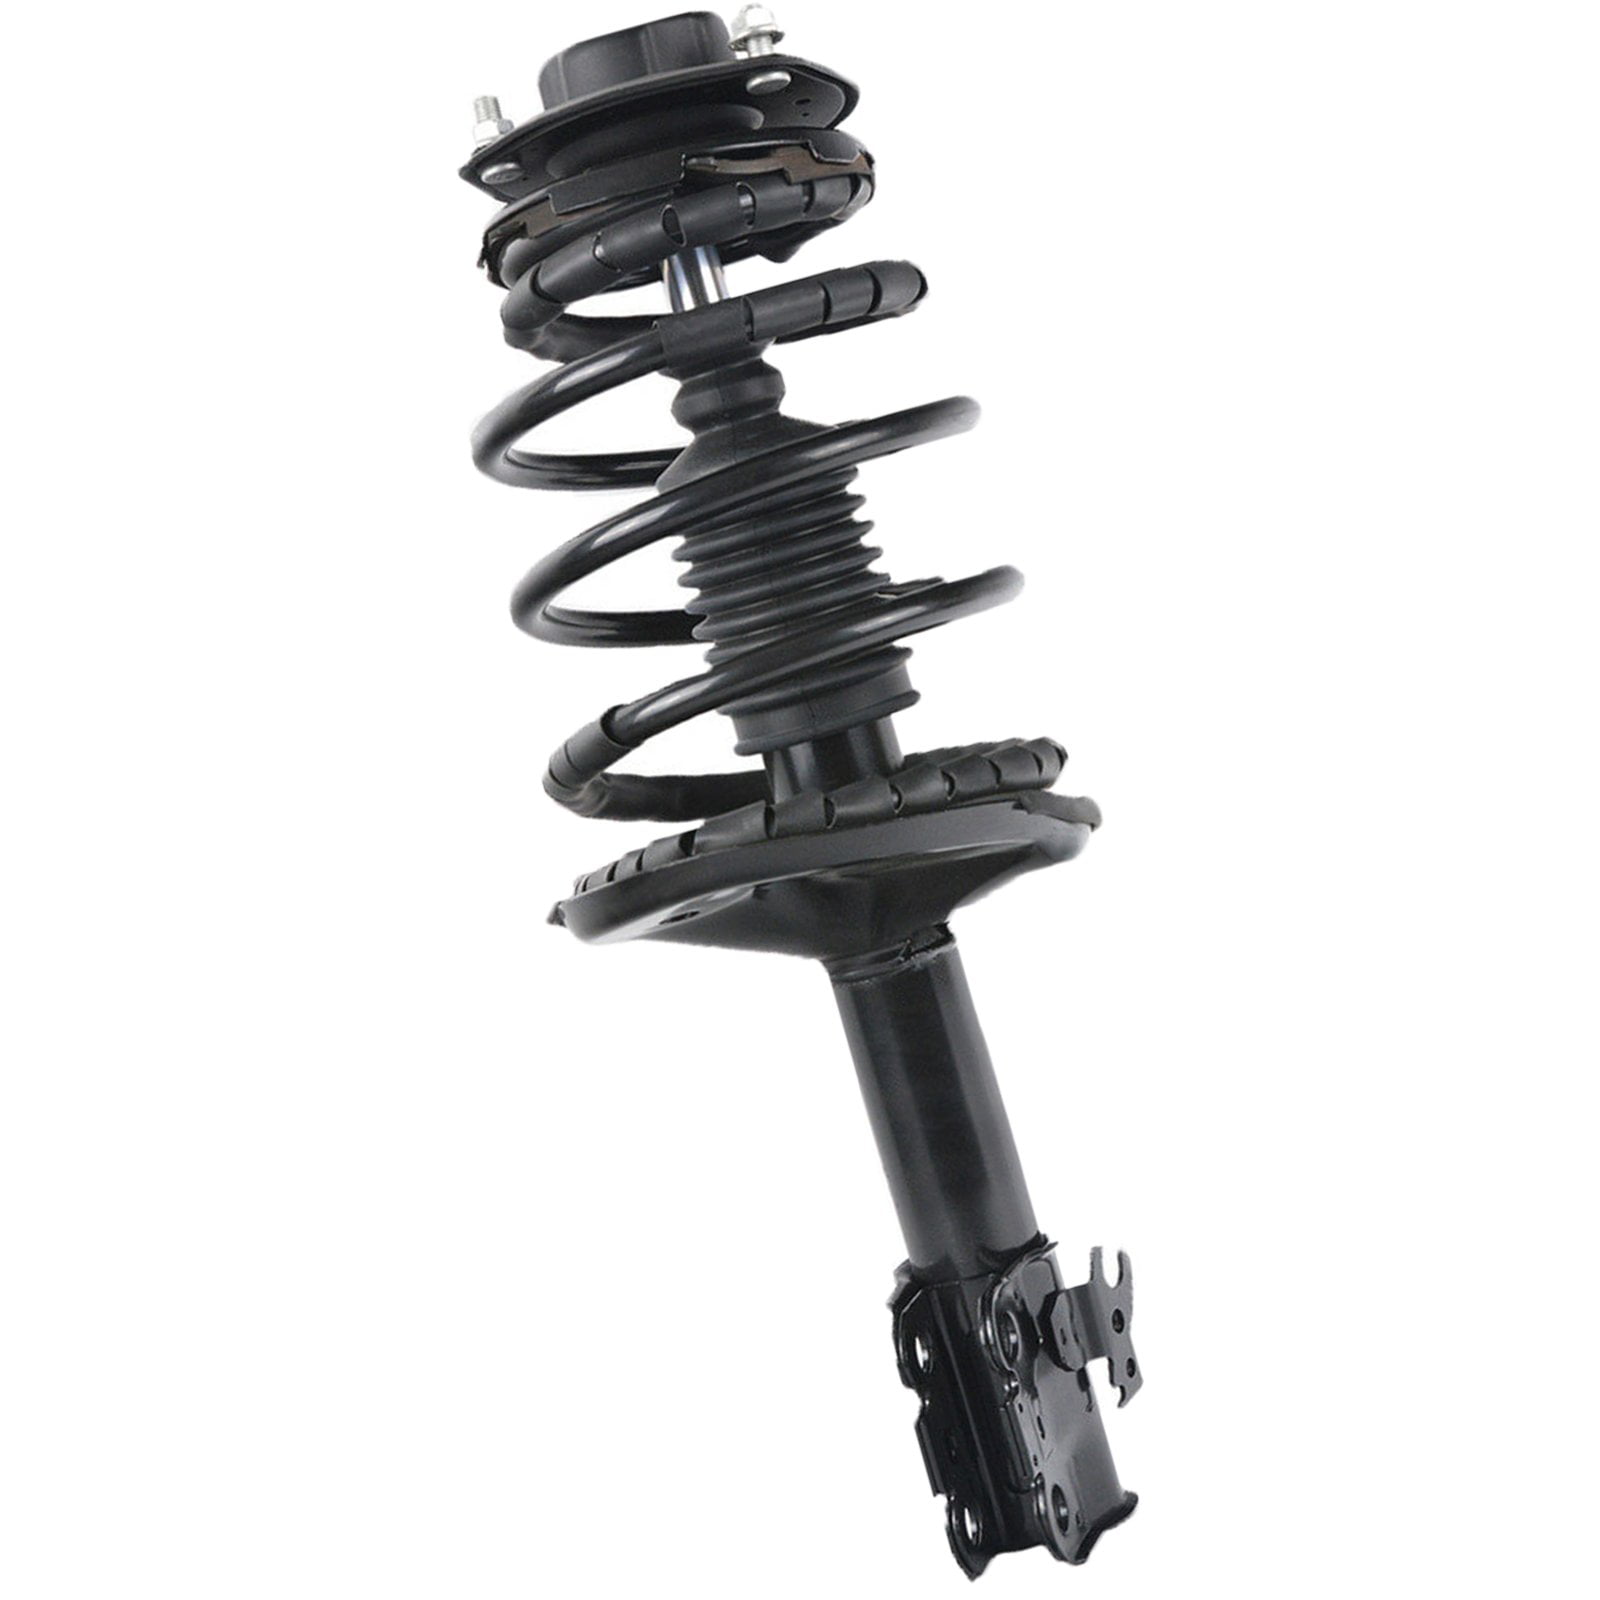 171980,171979 Struts Full set of 2 SAA036 Camry Complete Front Quick Shock and Struts with Coil Spring Assembly KAX Front Struts Fit For Camry 1992 1993 1994 1995 1996 